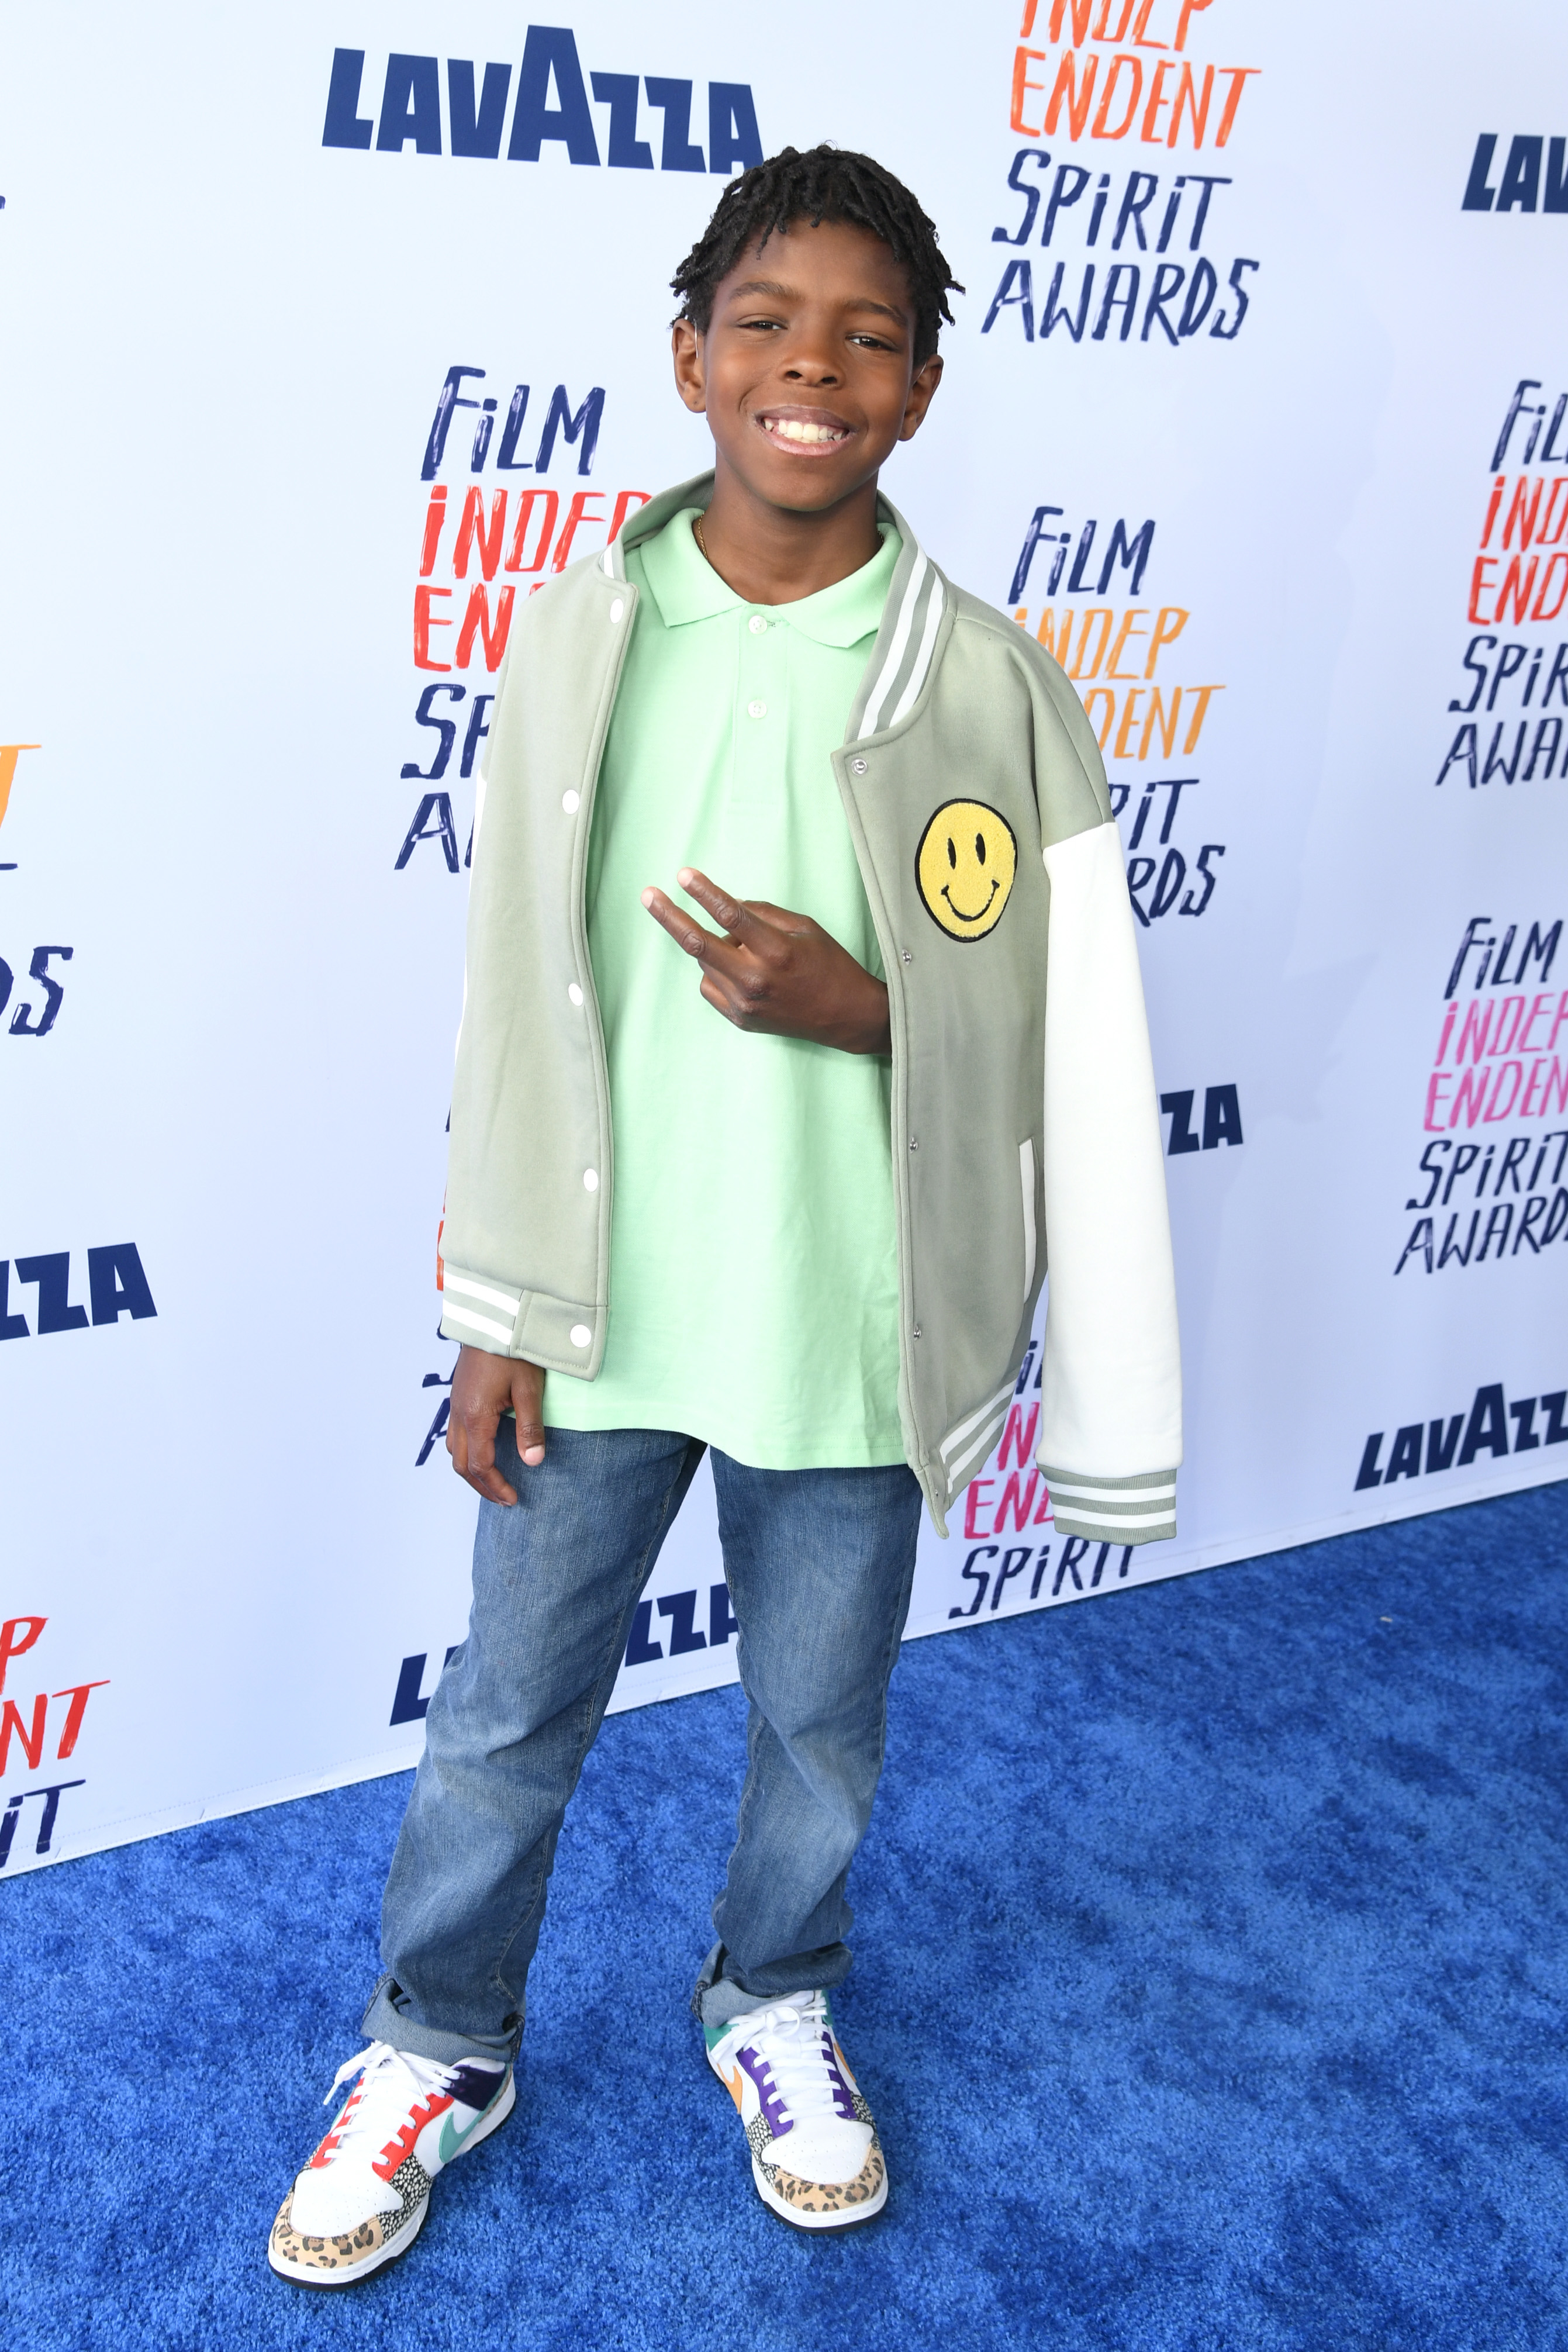 Keivonn Woodard stands on the red carpet with a casual layered look, a smiley-face detail on outerwear, and patterned sneakers